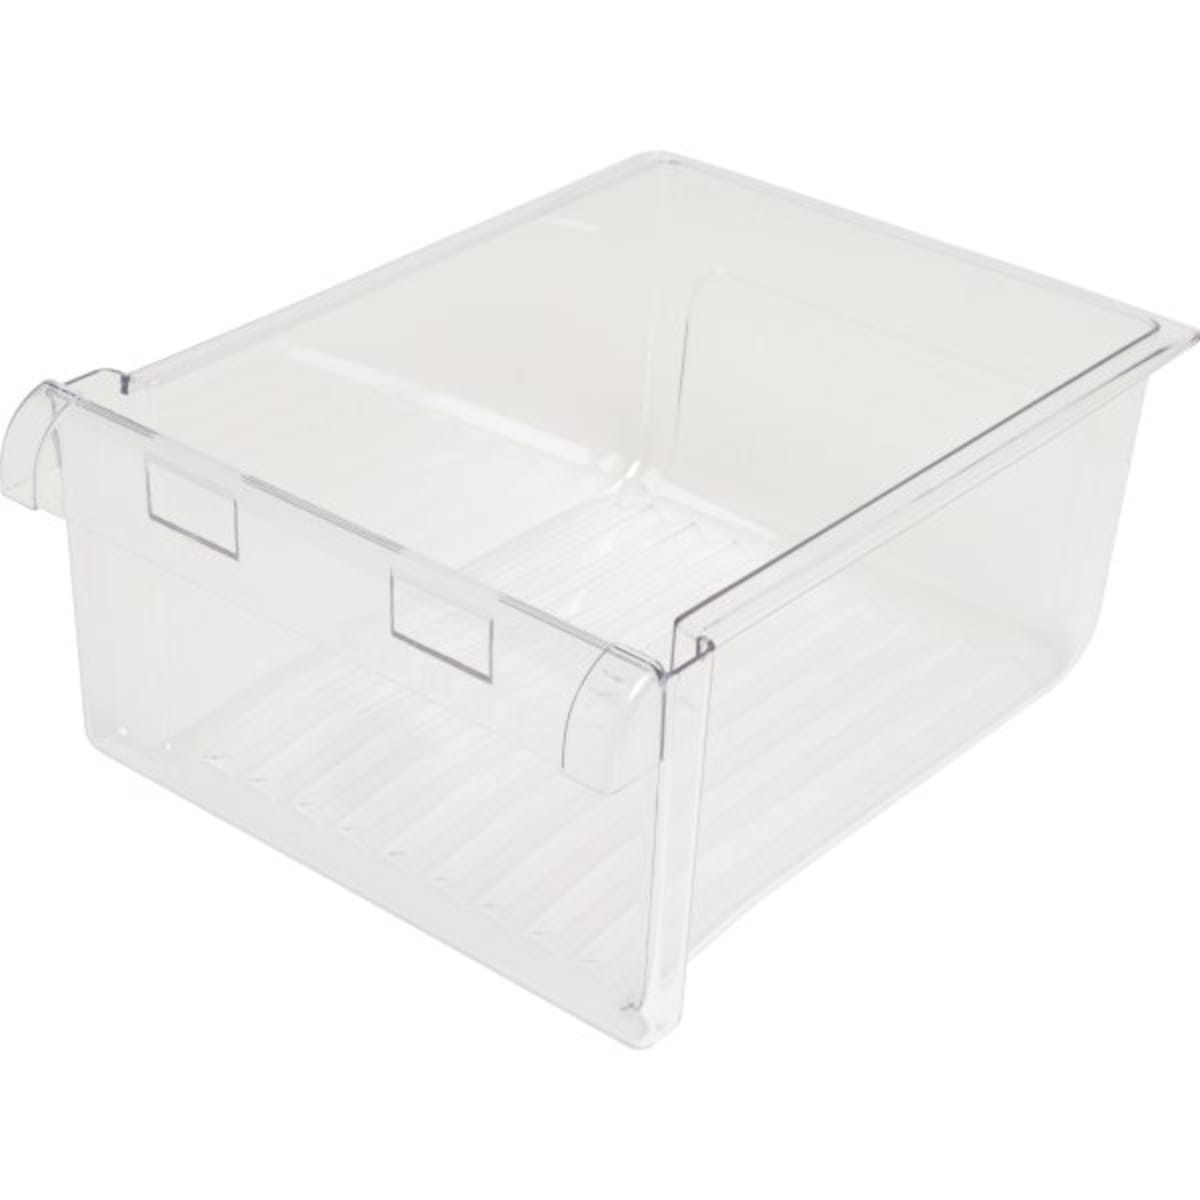 Replacement Bins Drawers Hd Supply